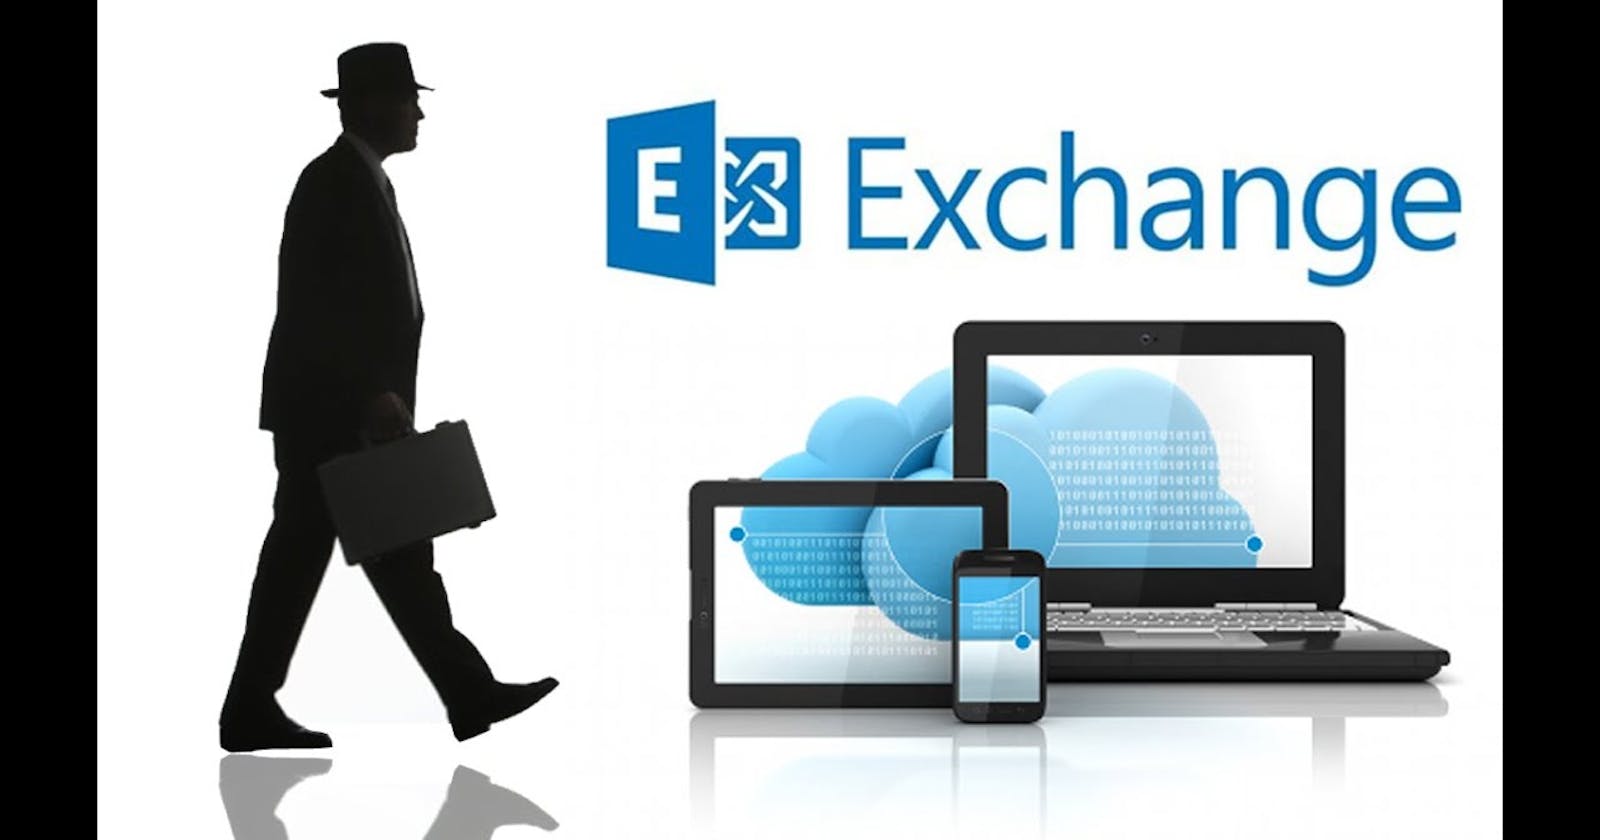 MICROSOFT EXCHANGE vulnerabilities patched.